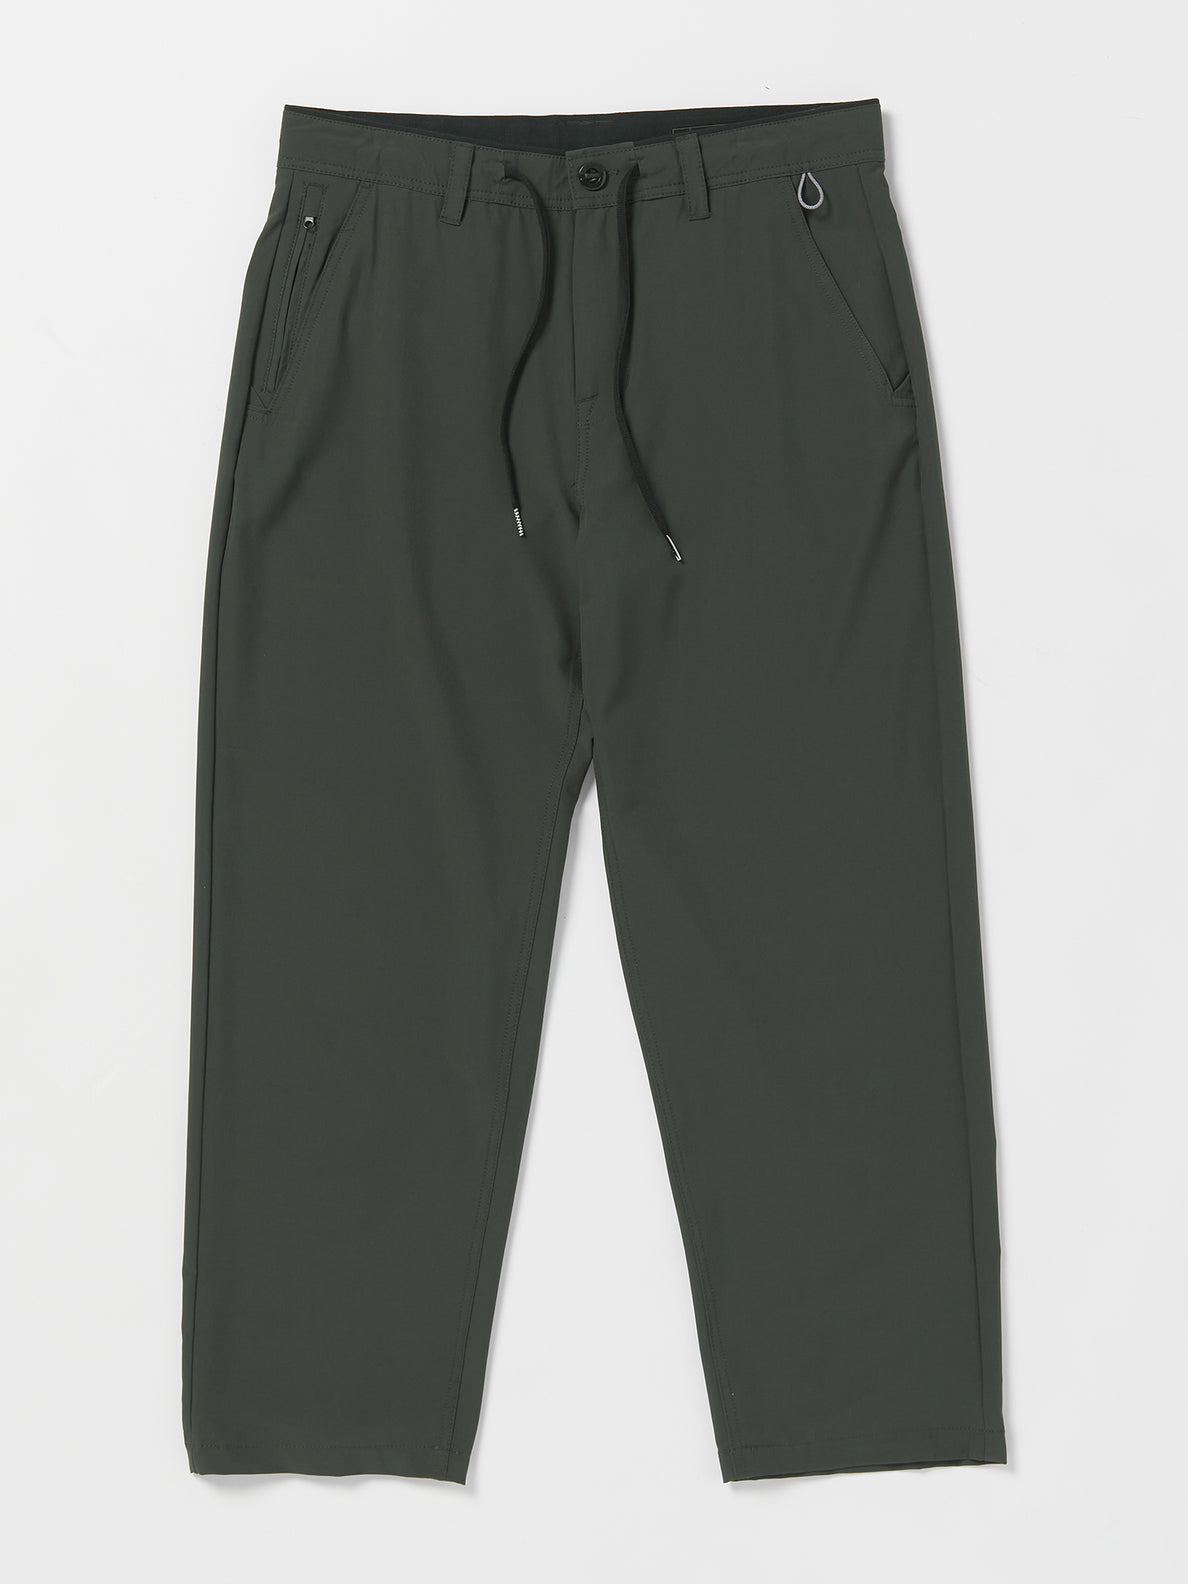 Veeco Transit Pants - Stealth (A1132308_STH) [F]